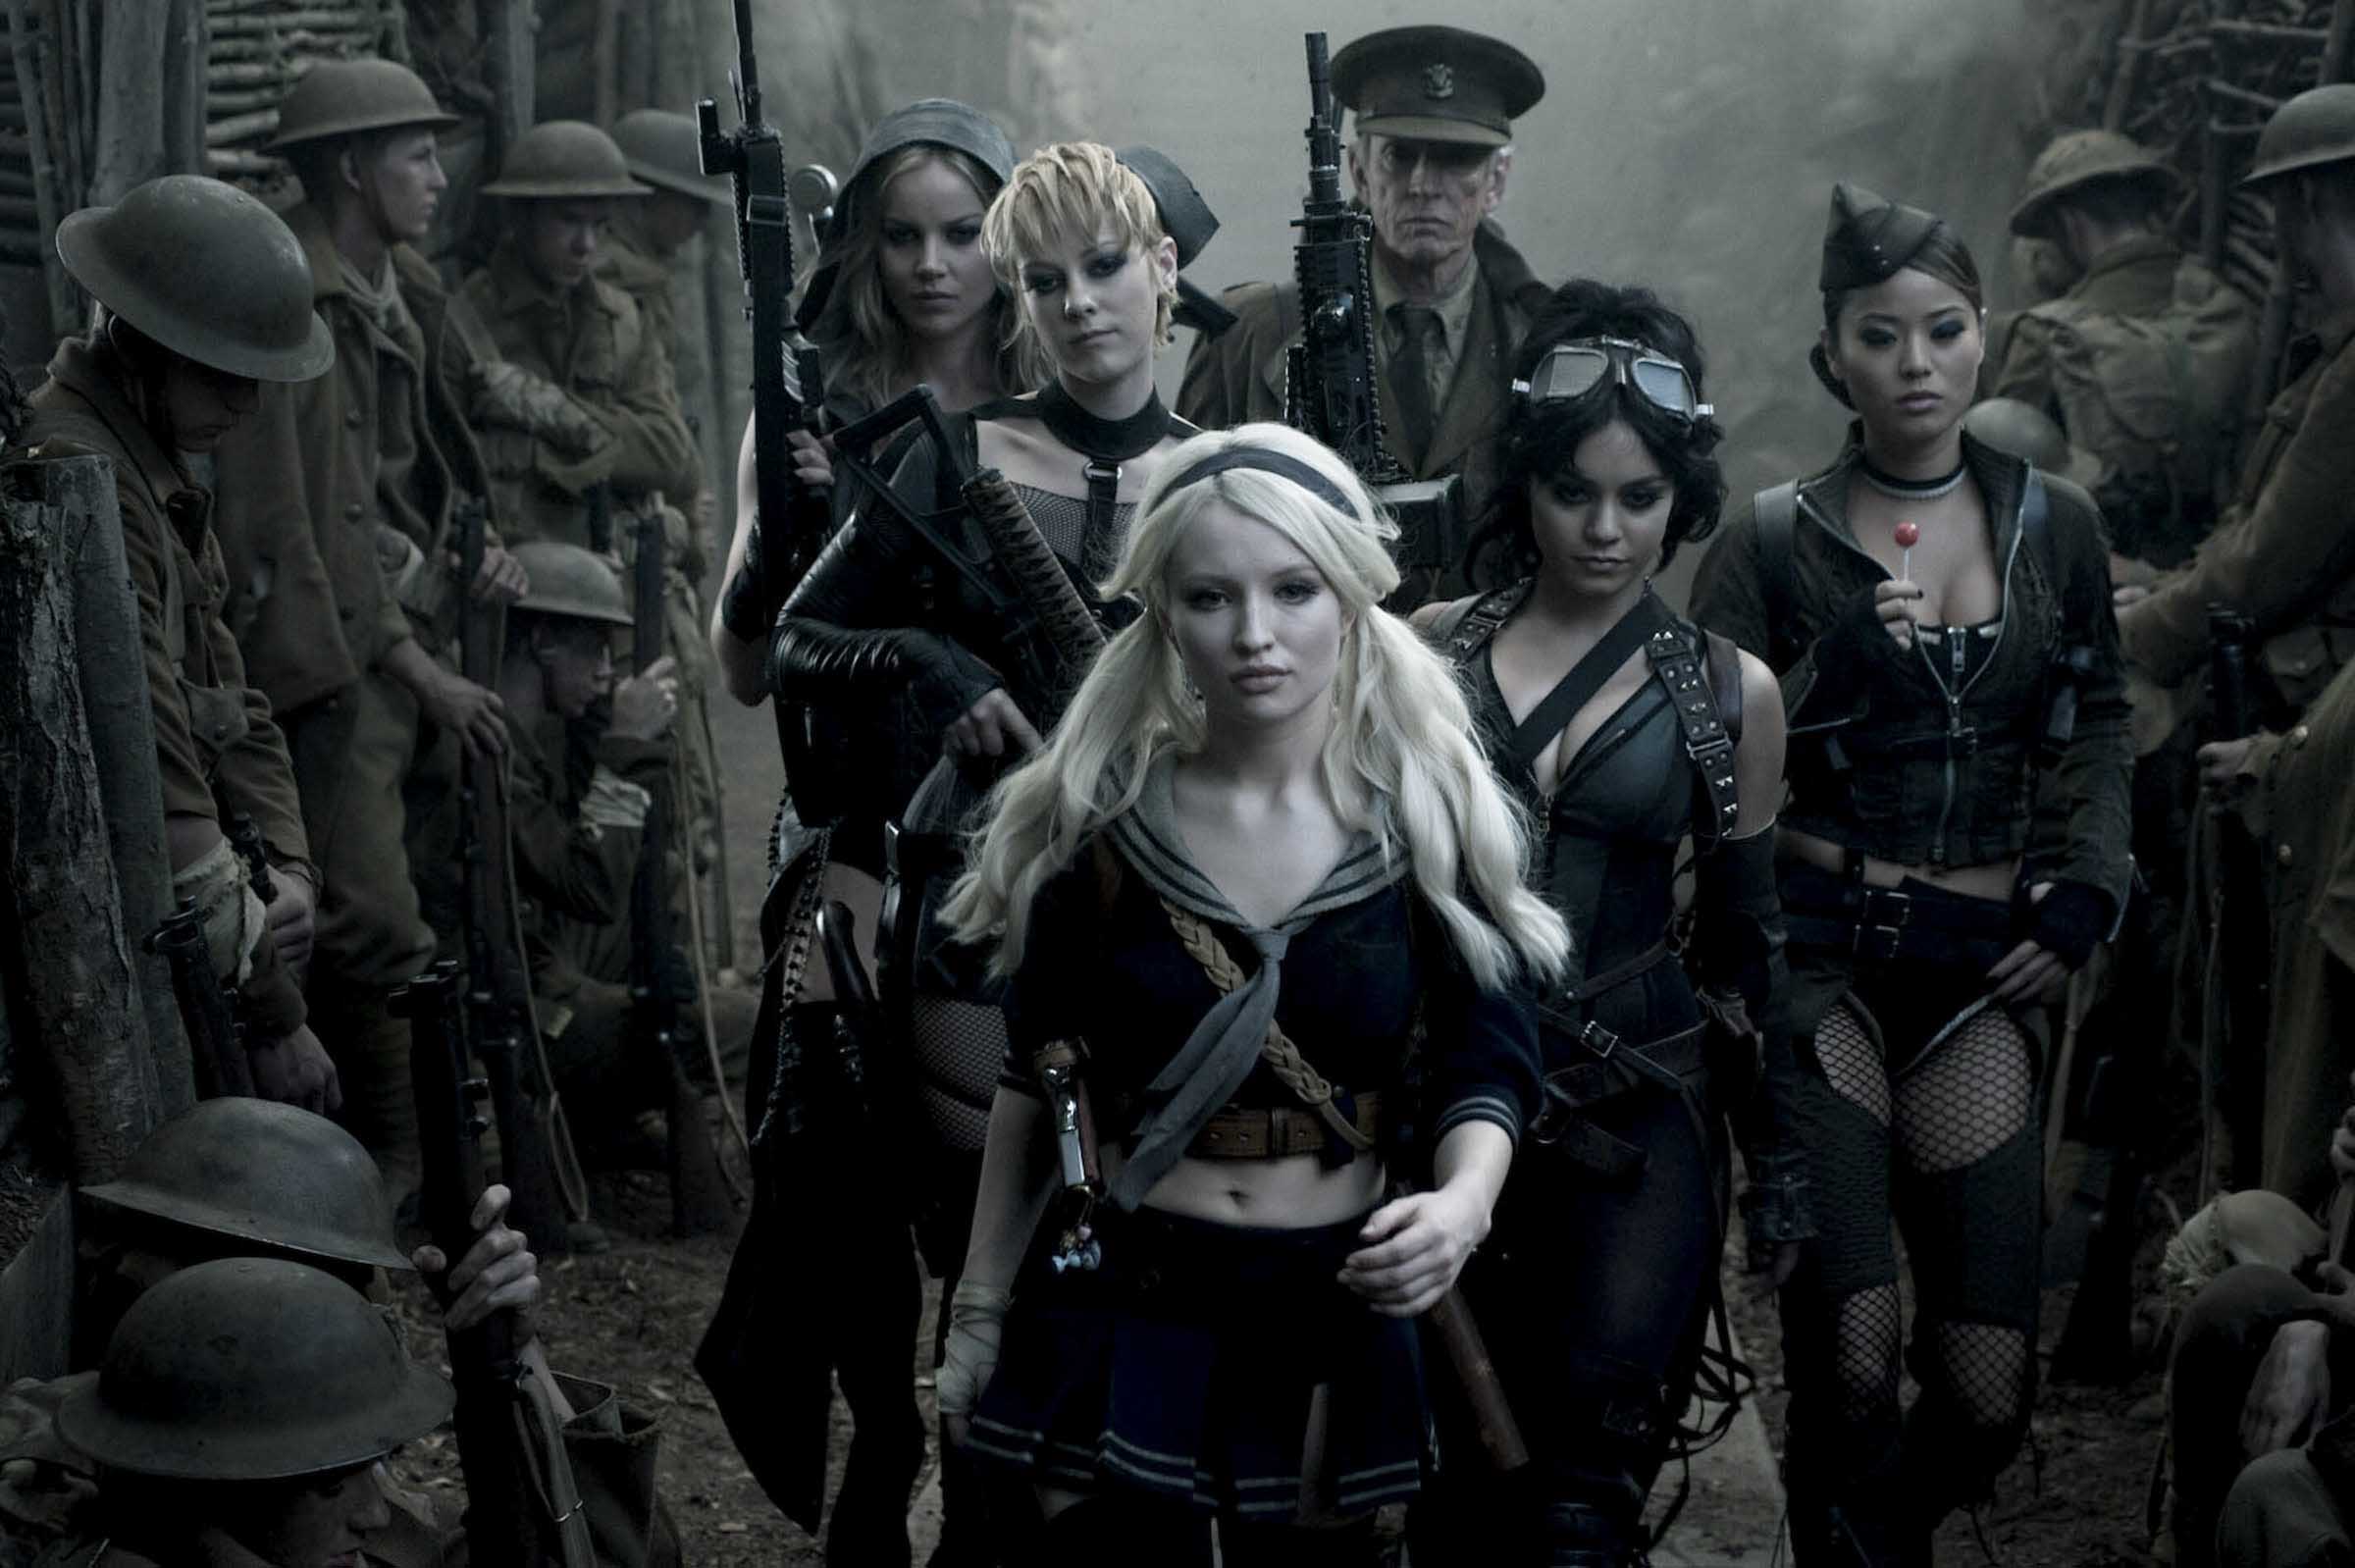  Abbie Cornish as Sweet Pea, Jena Malone as Rocket, Emily Browning as Babydoll, Scott Glenn as the Wise Man, Vanessa Hudgens as Blondie and Jamie Chung as Amber in Warner Bros. Pictures’ and Legendary Pictures’ action fantasy Sucker Punch, a Warner Bros. Pictures release.